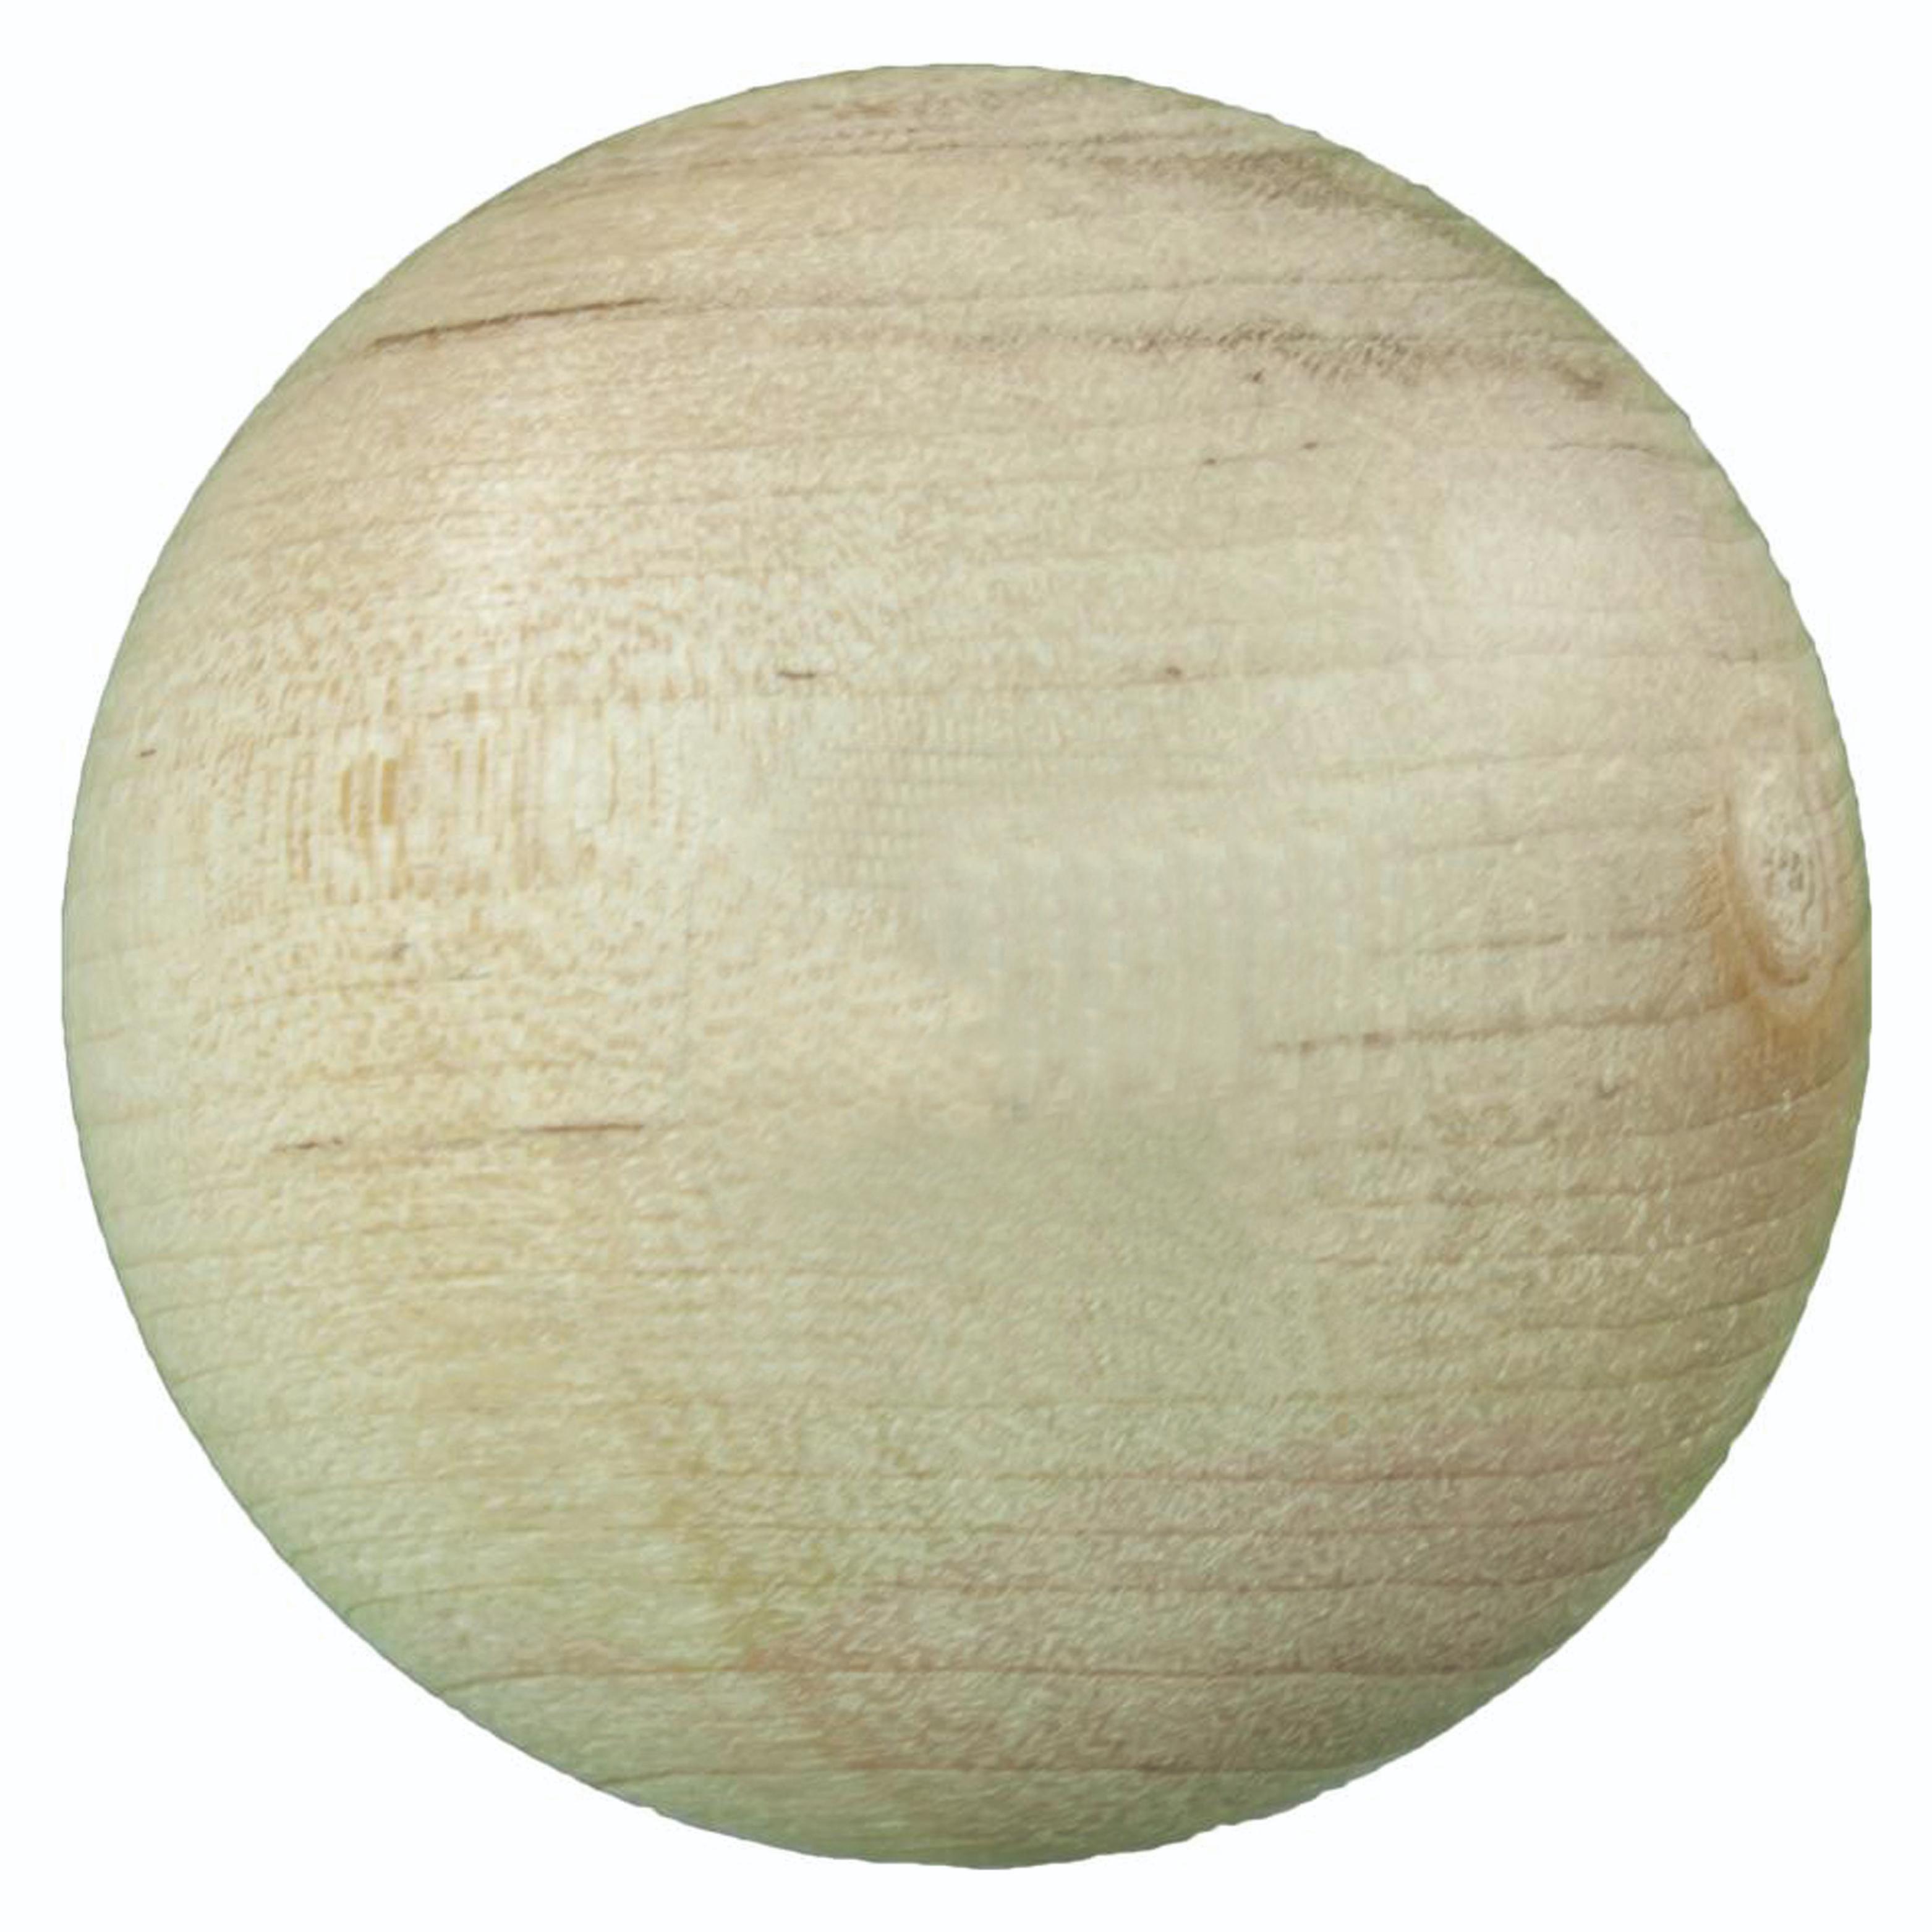 A&R Wood Stick Handling Ballproduct zoom image #1